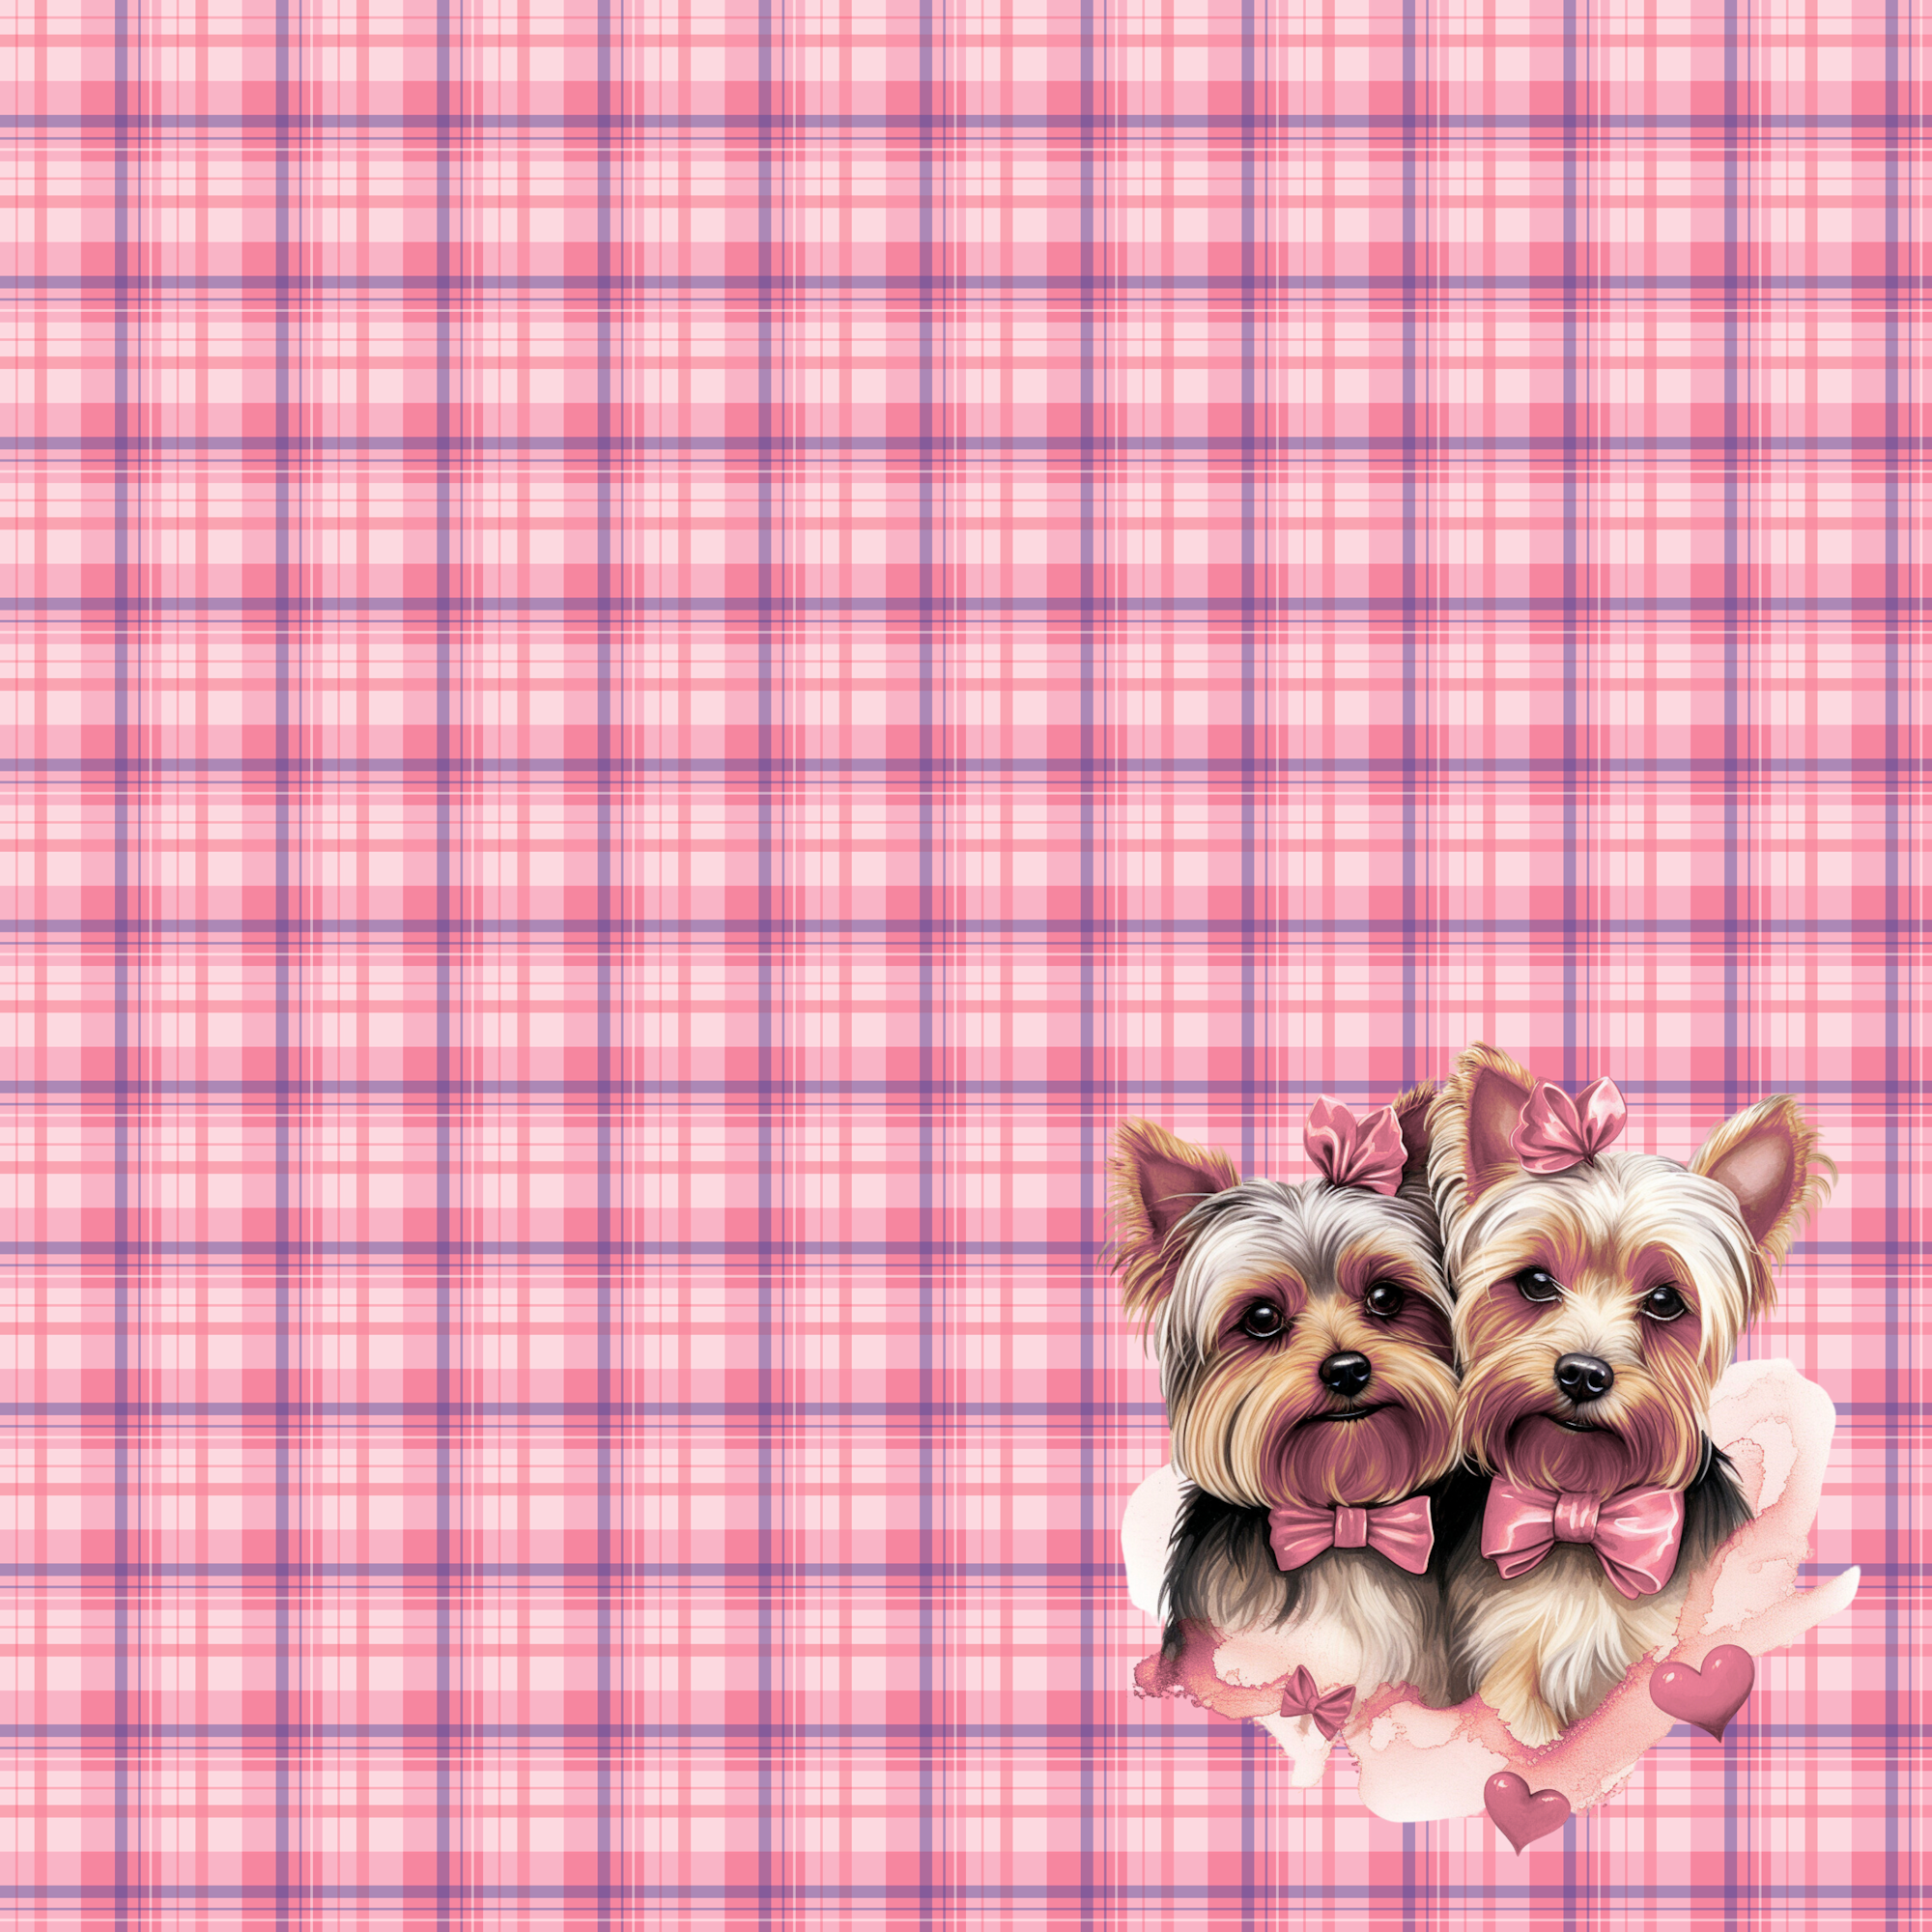 My Punny Valentine Collection You Had Me At Woof 12 x 12 Double-Sided Scrapbook Paper by SSC Designs